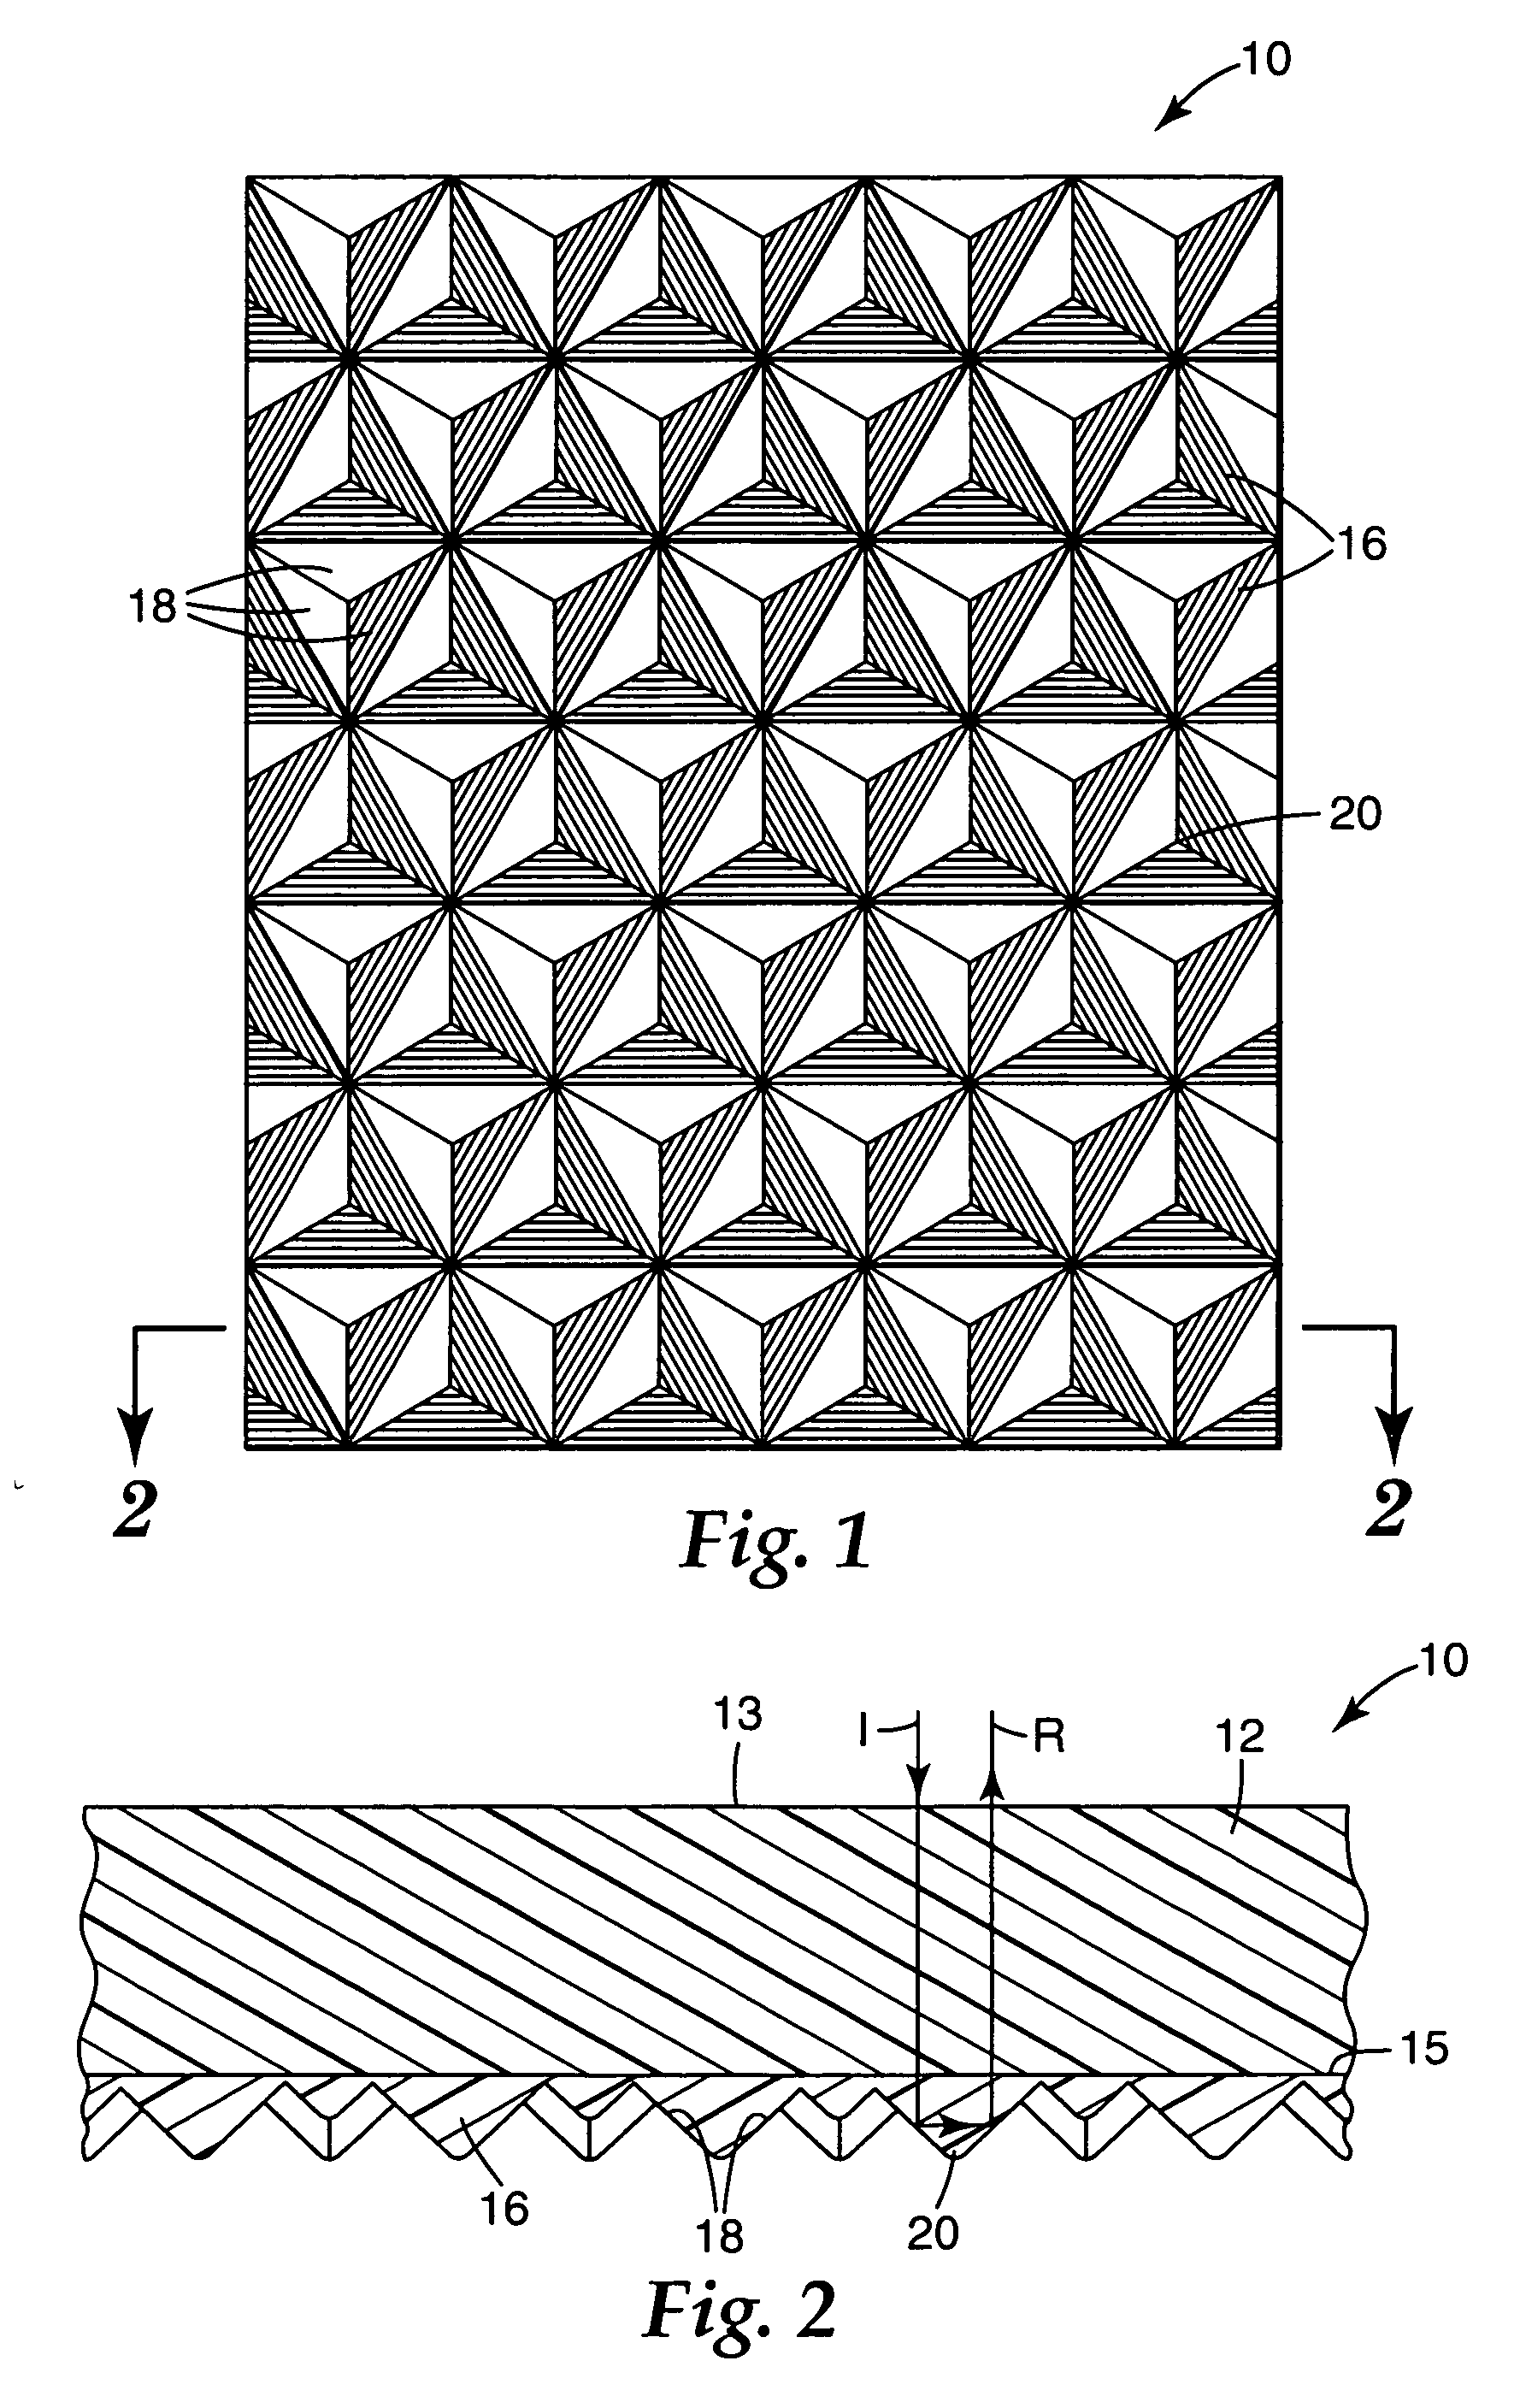 Prismatic retroreflective article with fluorine- or silicon-containing prisms